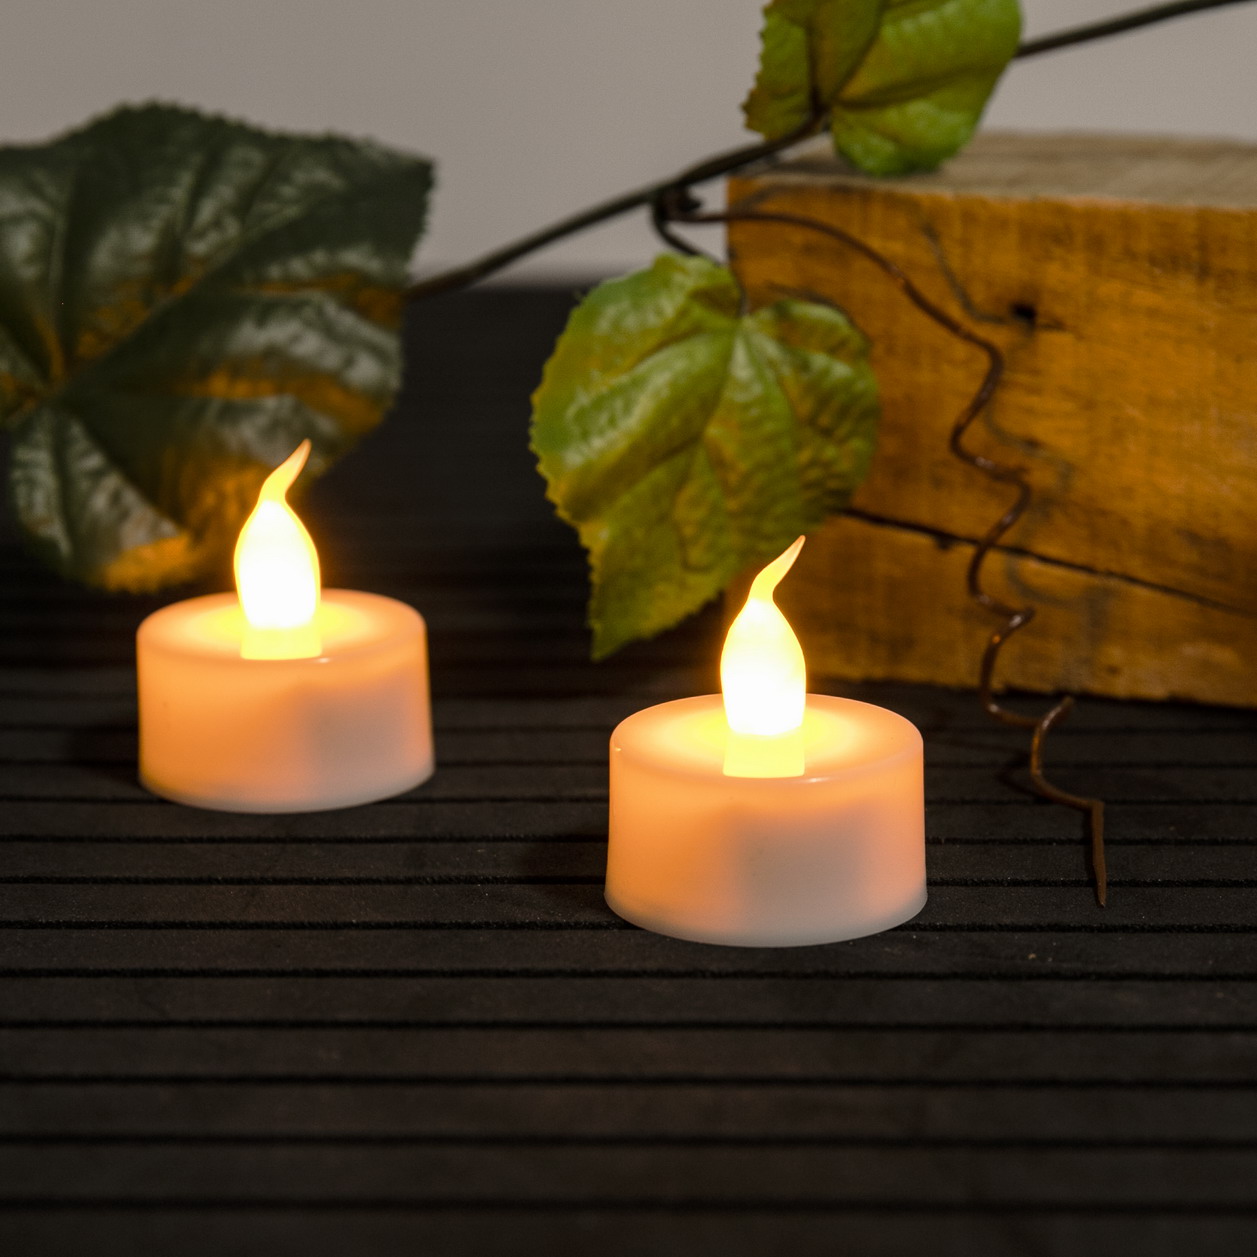 Wholesale Flameless Tea Light candles Flickering Battery Tea Lights for Indoor Use | ZHONGXIN Featured Image